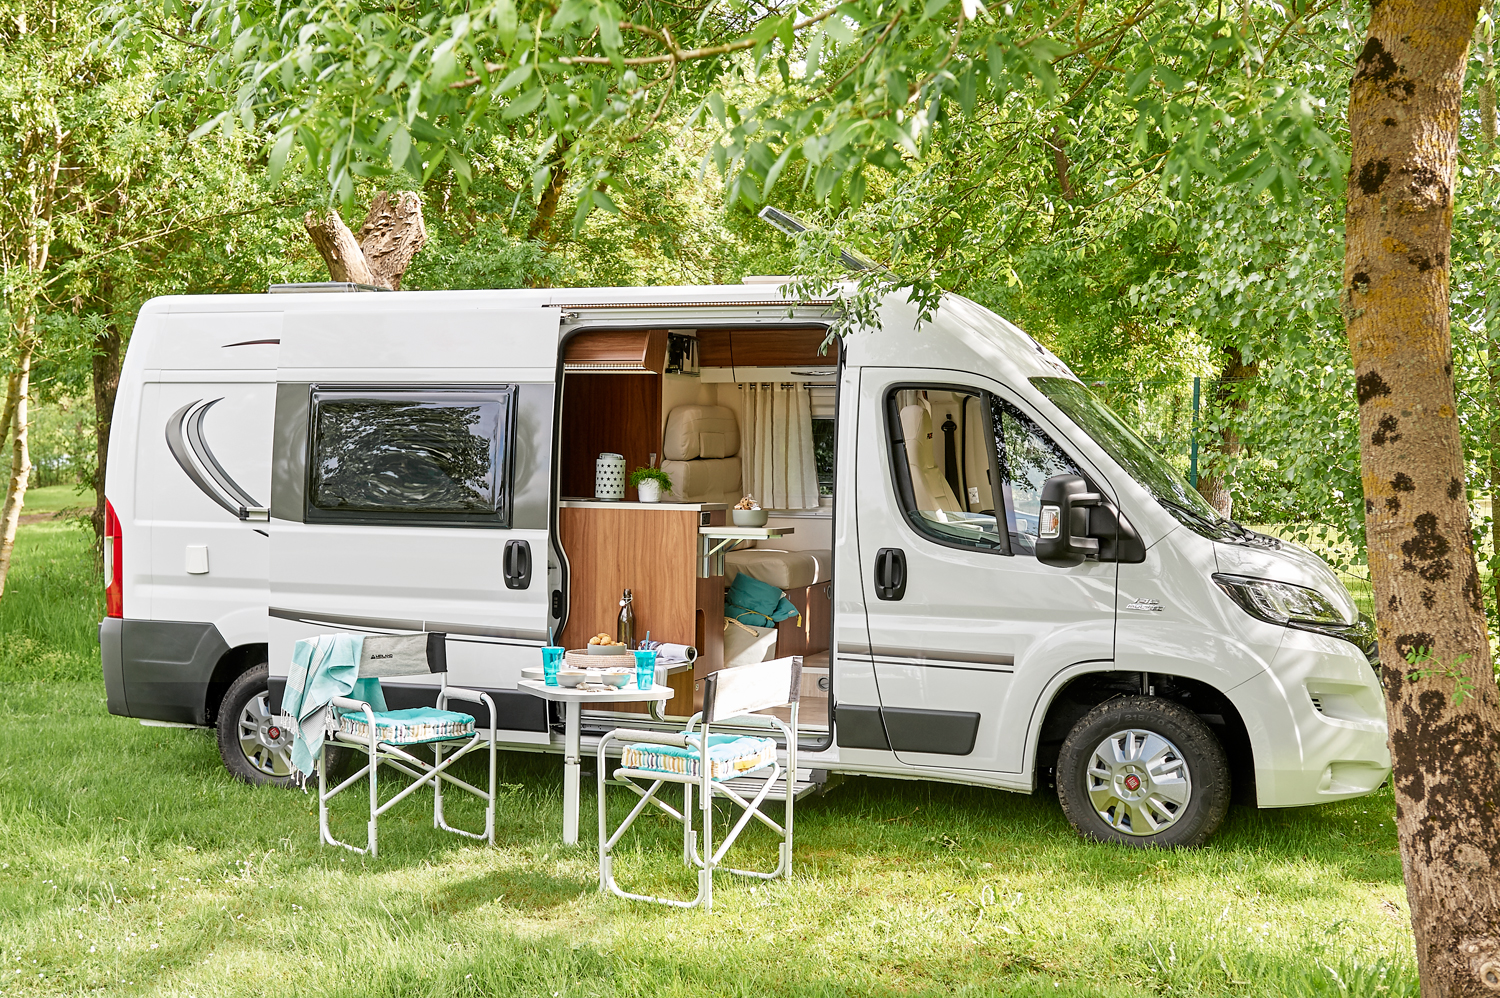 Pilote will satisfy your hunger for camper vans – main image